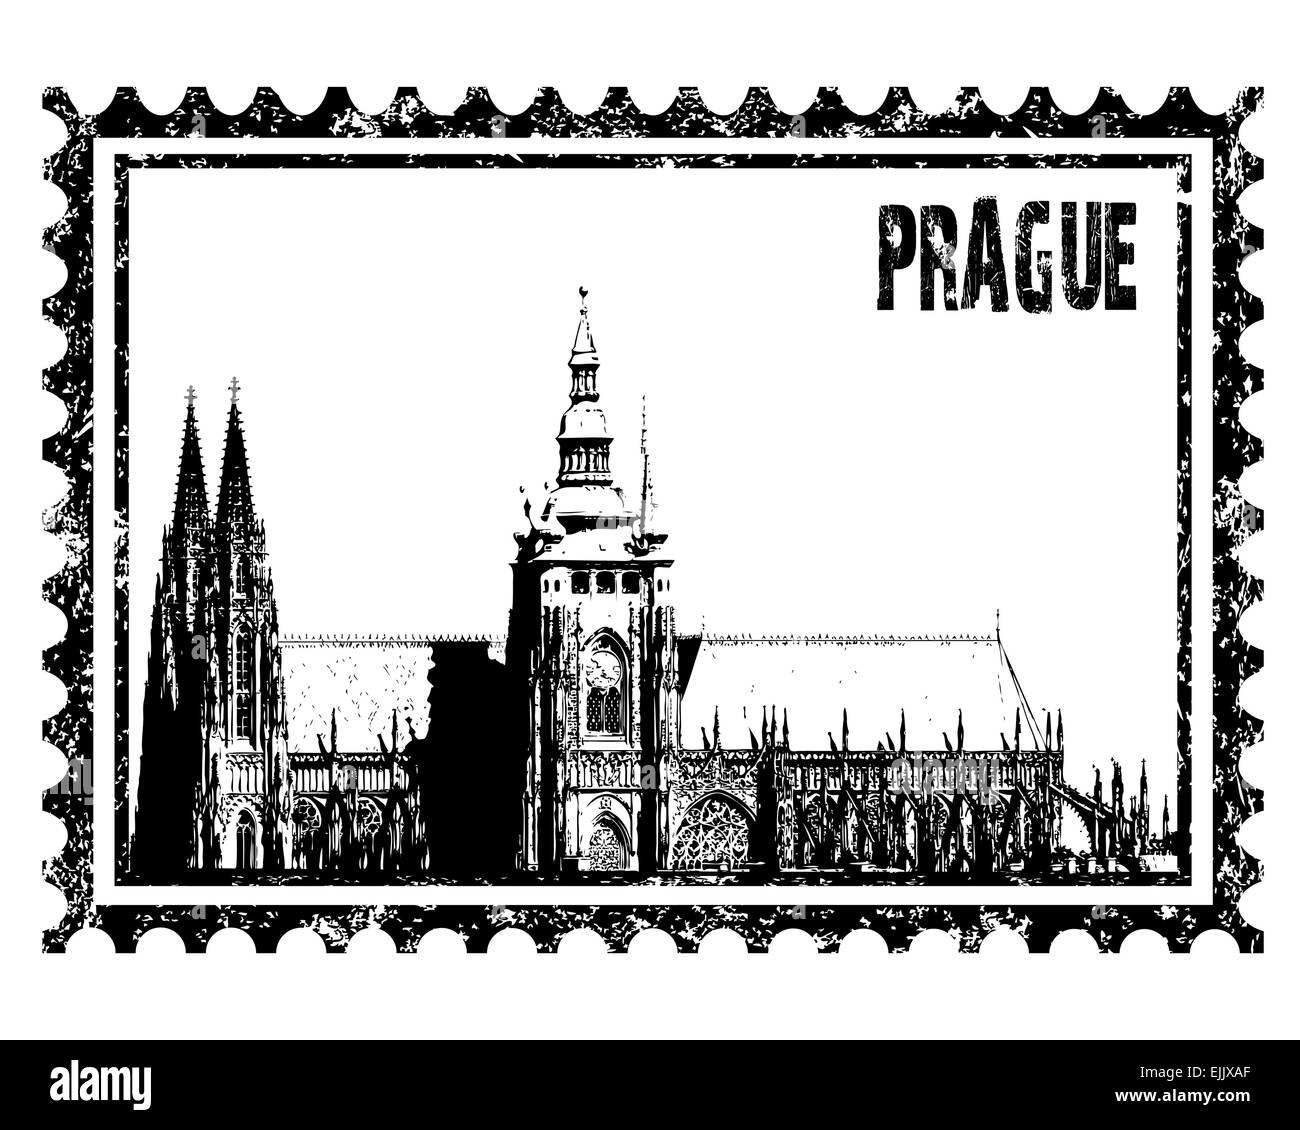 Vector illustration - Hradcany - Cathedral of Saint Vitus in the Prague castle Stock Vector